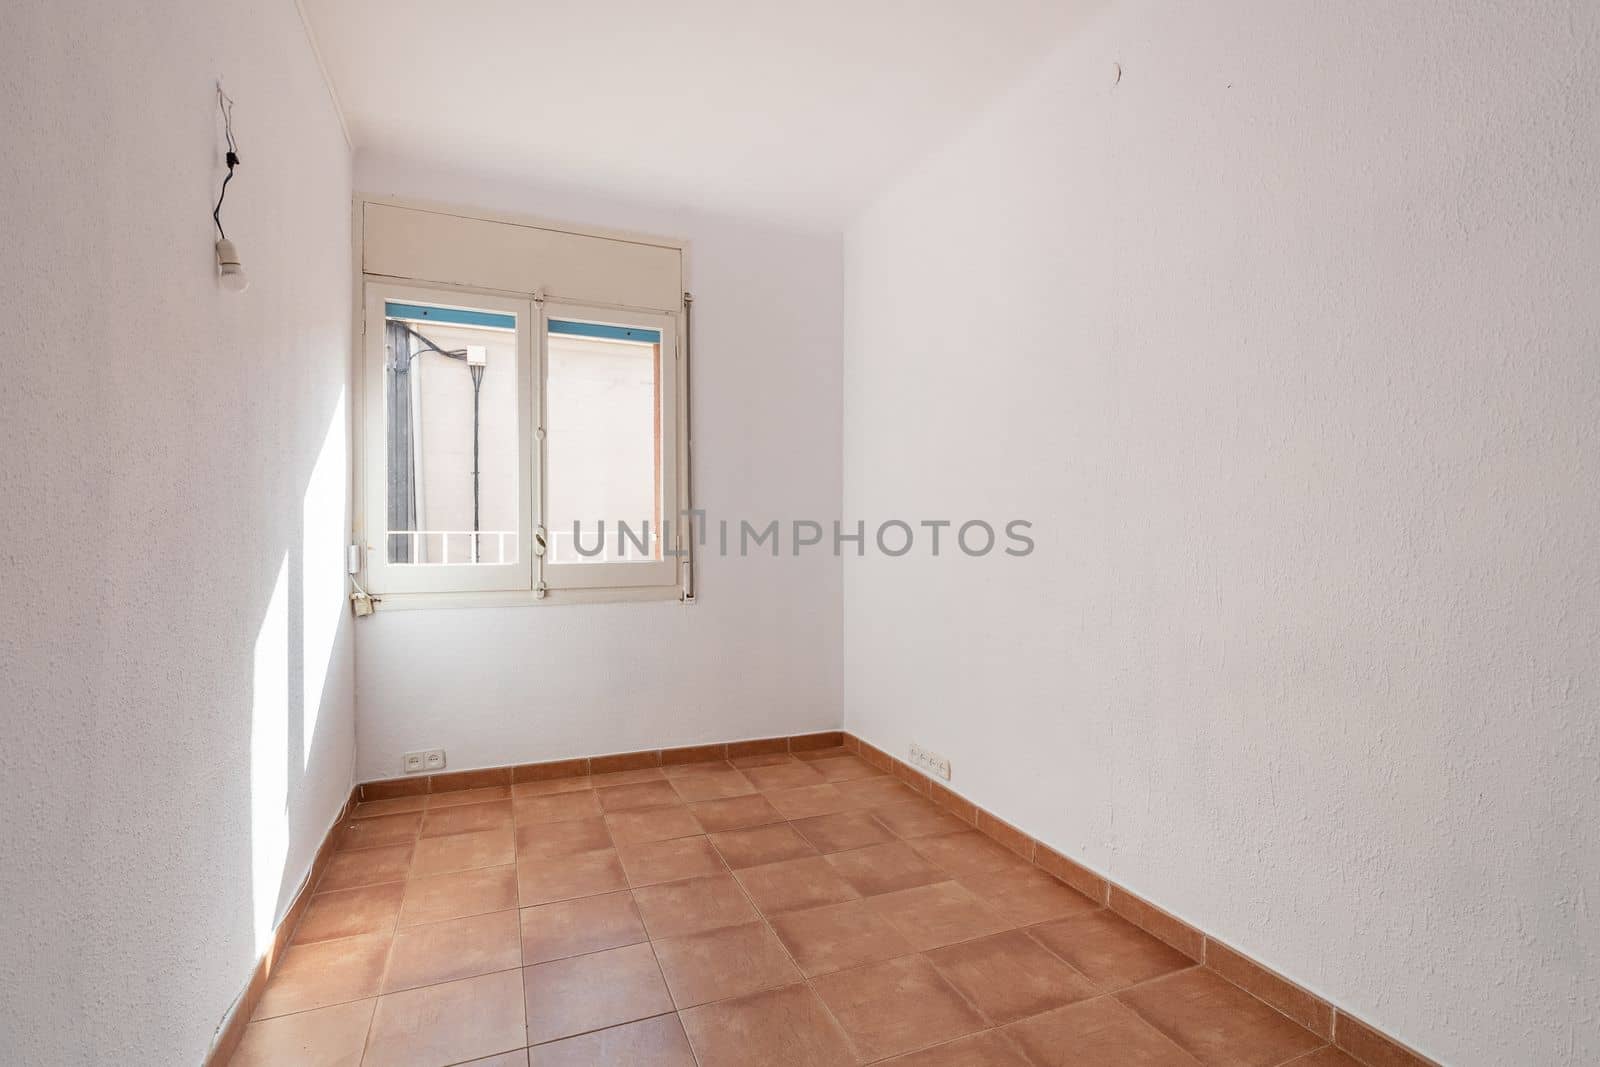 An empty spacious room with old square worn caramel colored floor tiles and window with natural sun light, white faded walls and ceiling. The wires for the lamp stick out in the wall. by apavlin